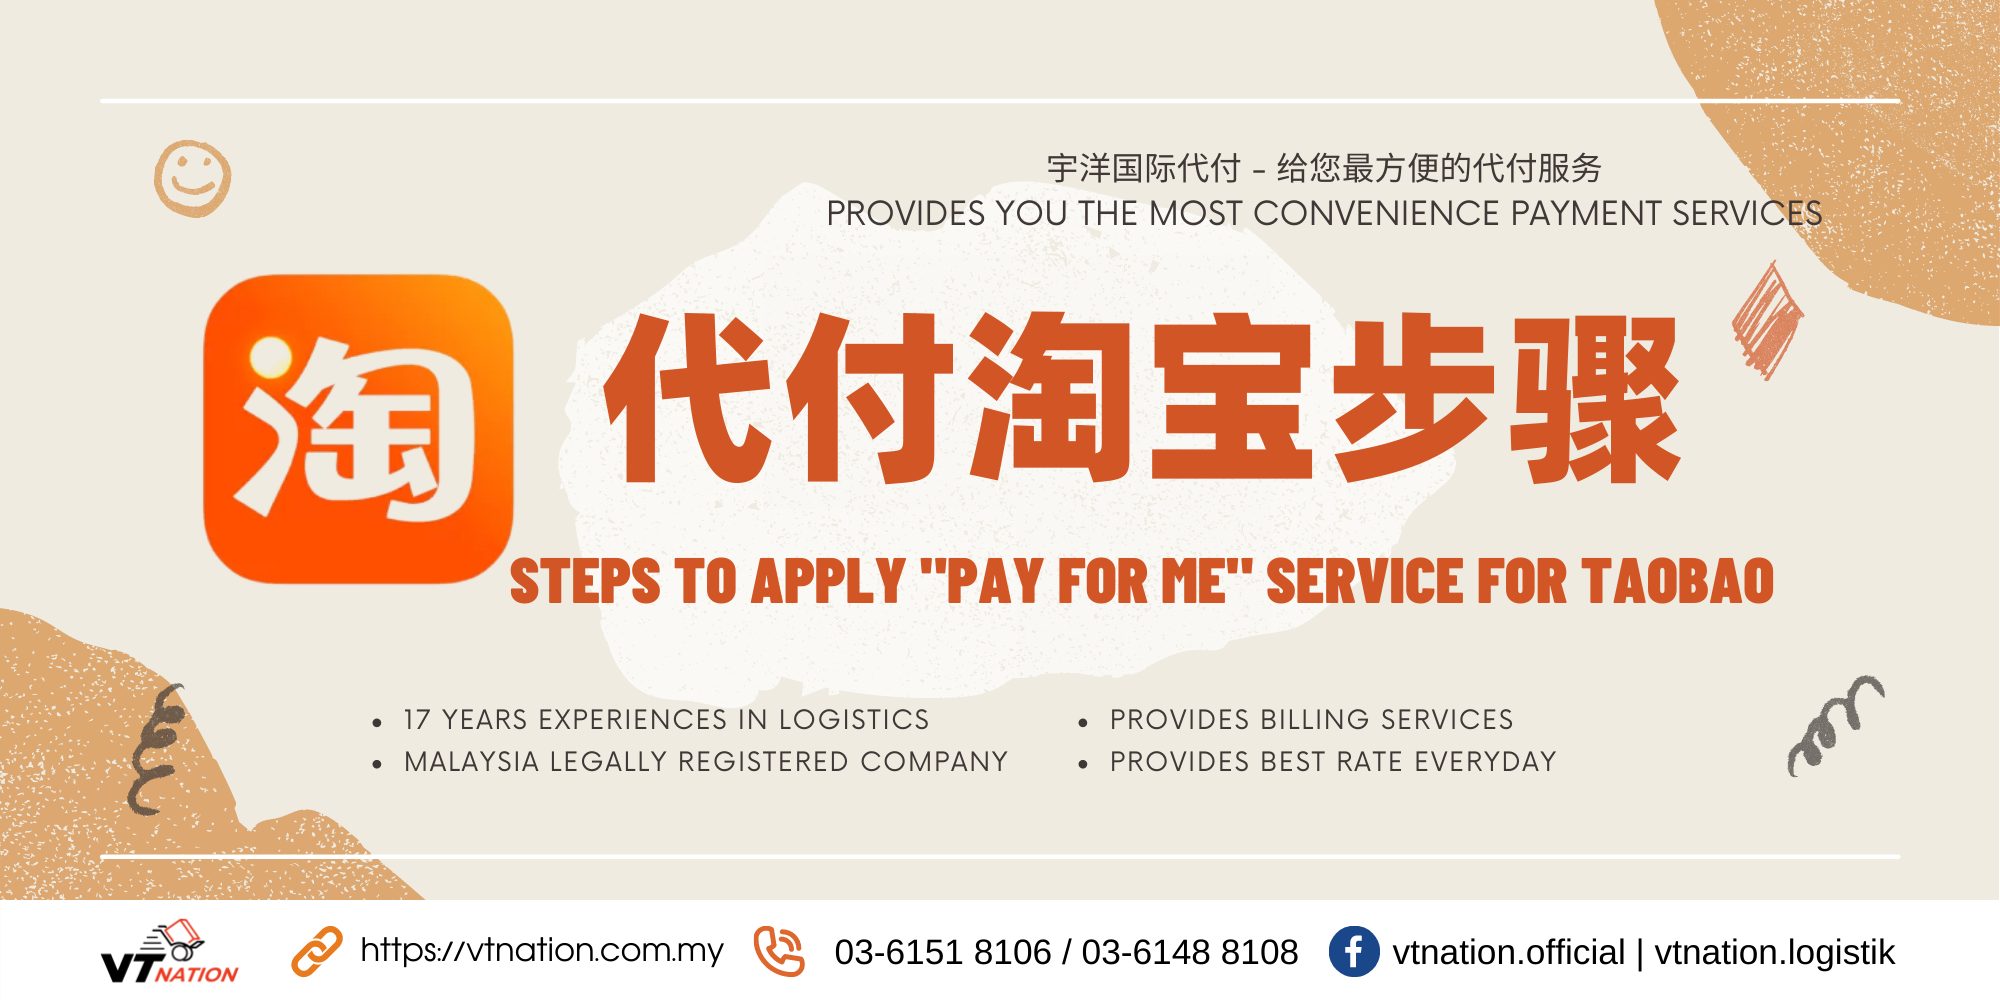 Steps to apply “Pay for me” services in Taobao